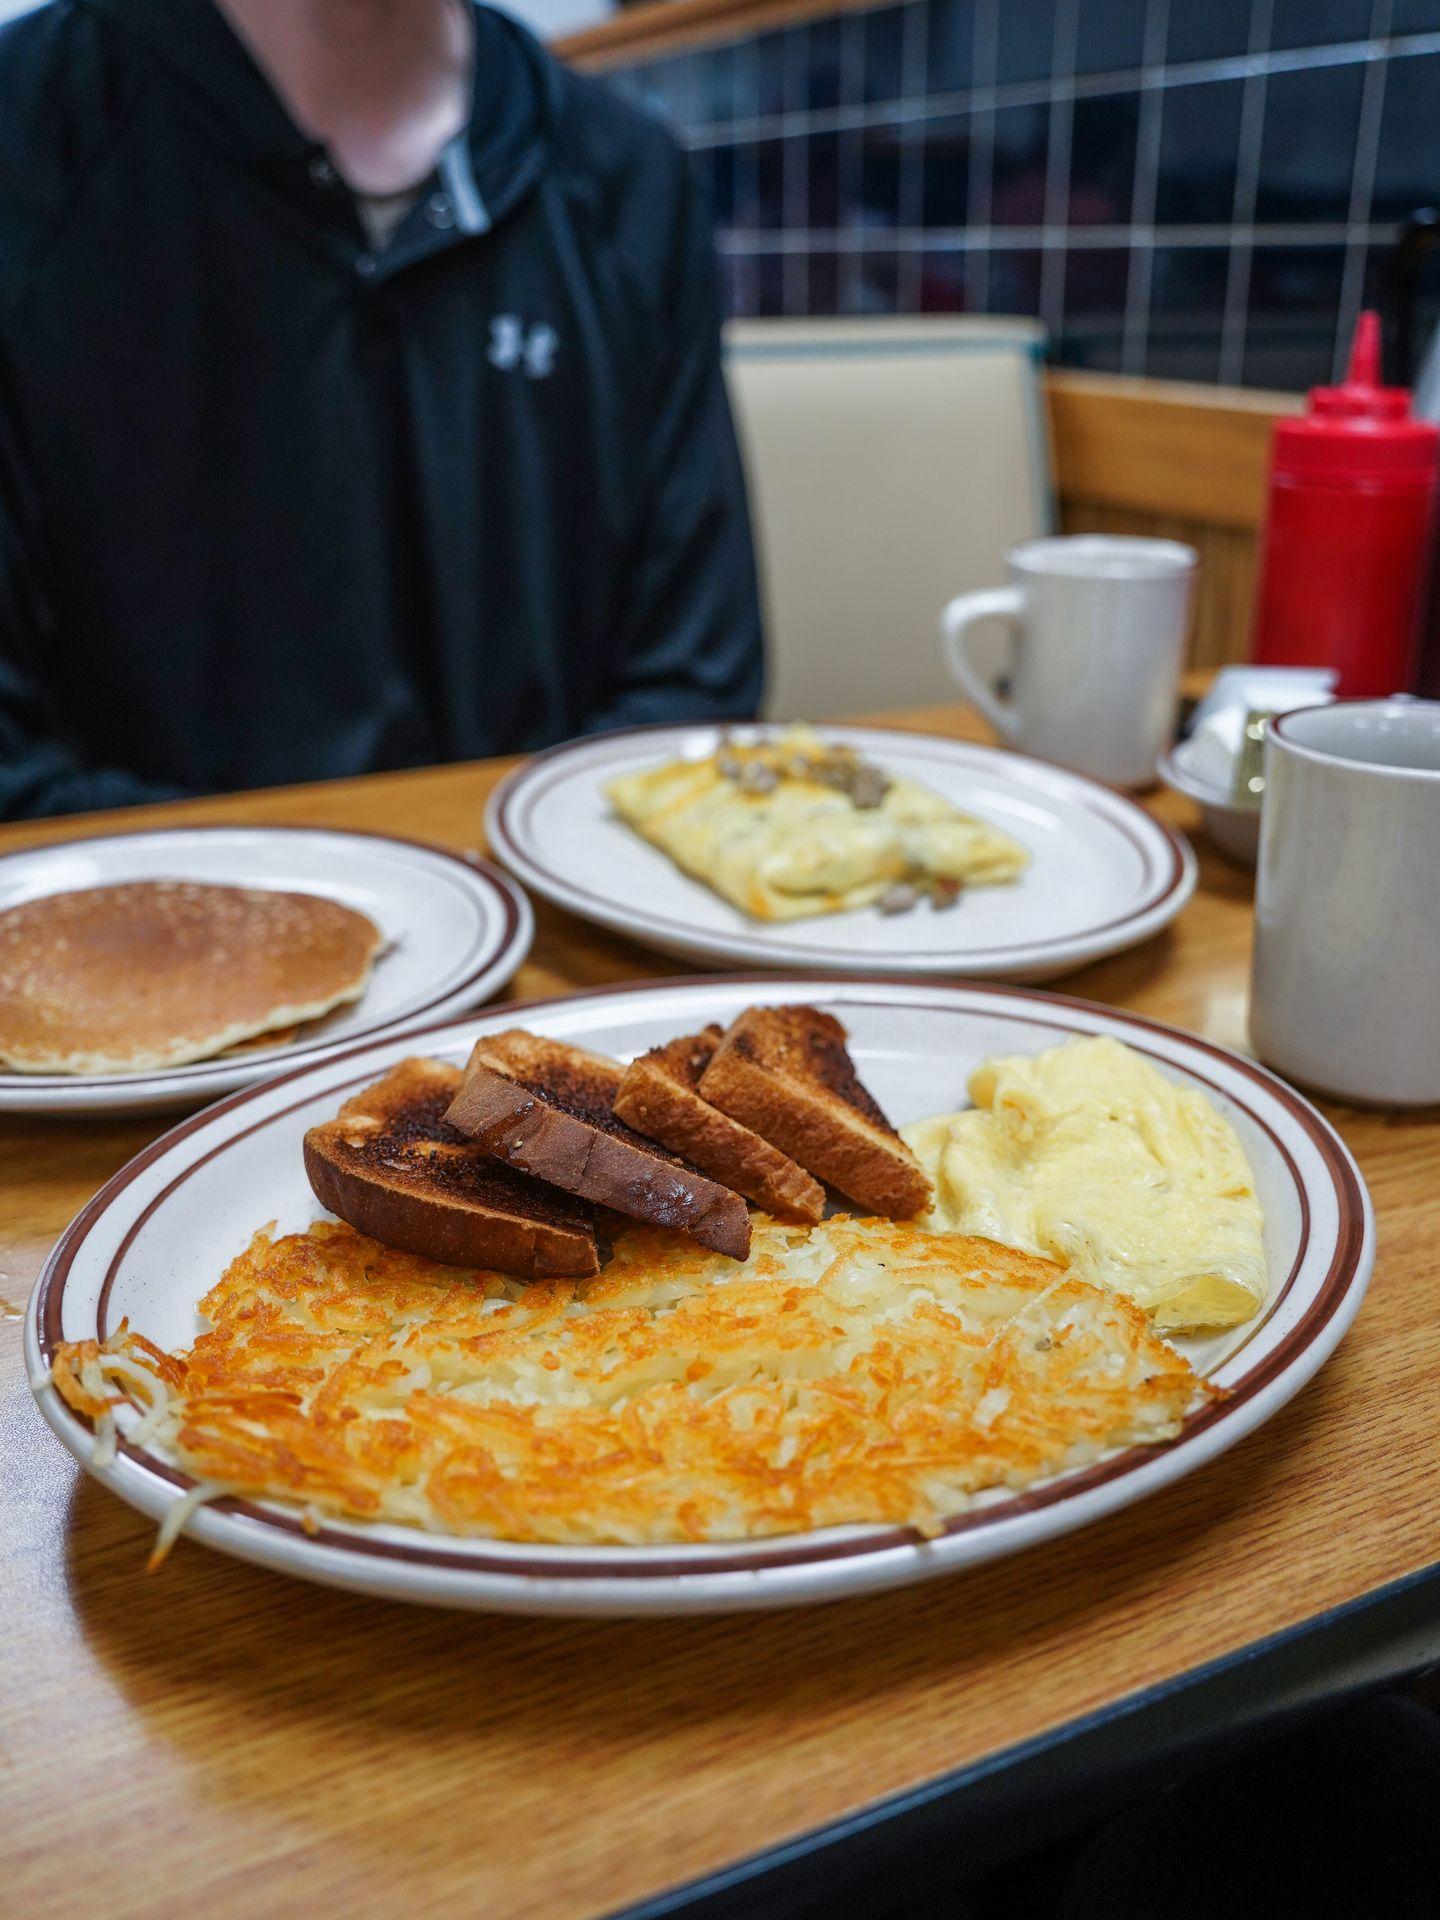 A plate of hashbrowns, toast and eggs at Brigitte's Cafe